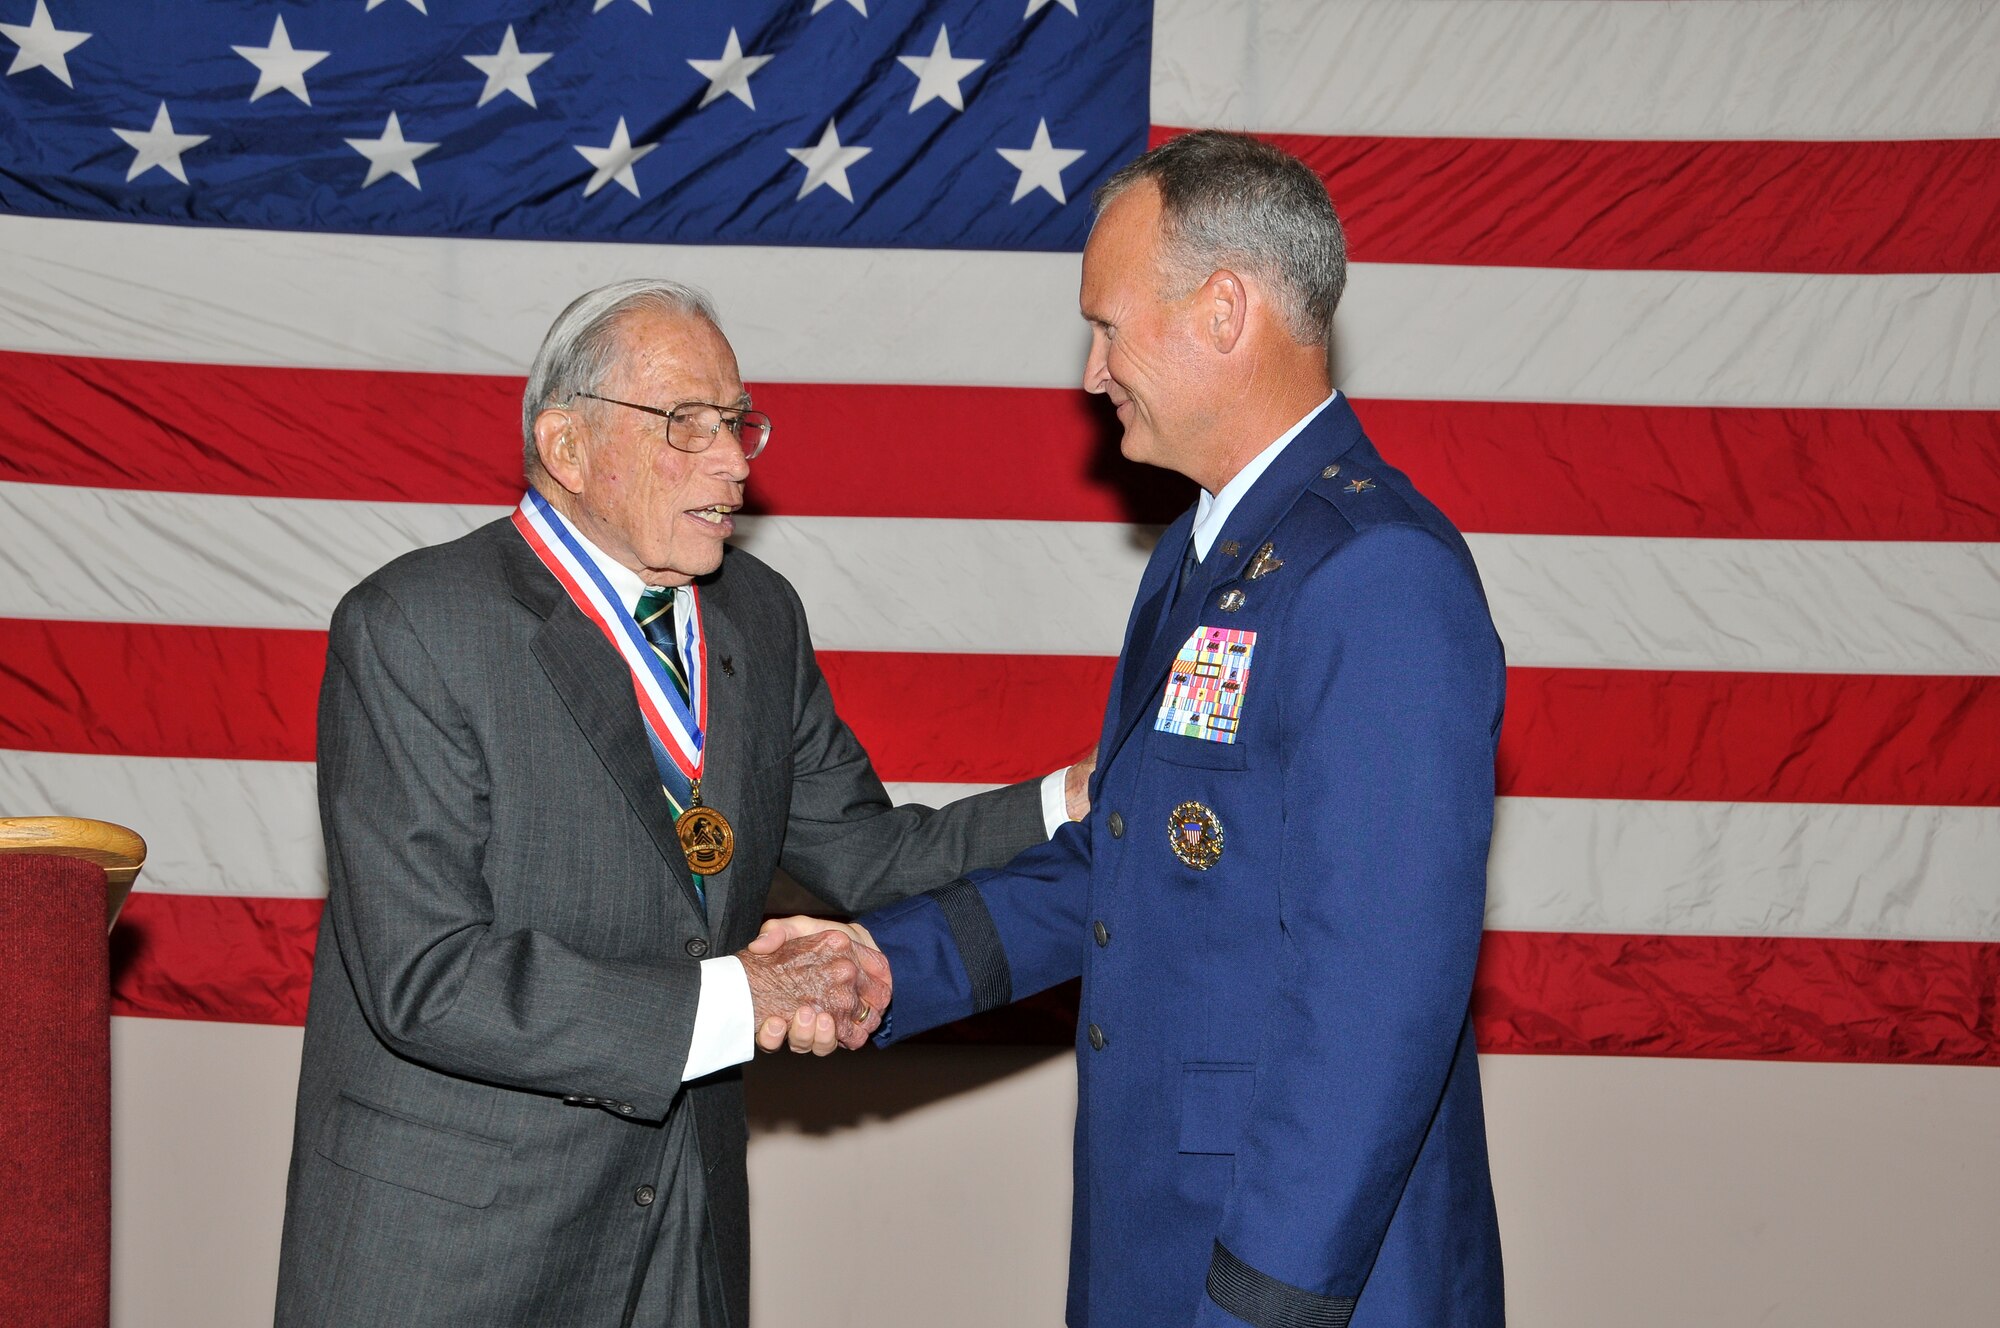 Brig. Gen. James Browne, 325th Fighter Wing commander, presents Mr. John Donnell the Noncommissioned Officers' Association World War II Veterans Medallion during his promotion ceremony at Tyndall’s Heritage Club June 4. (U.S. Air Force photo by Lisa Norman)